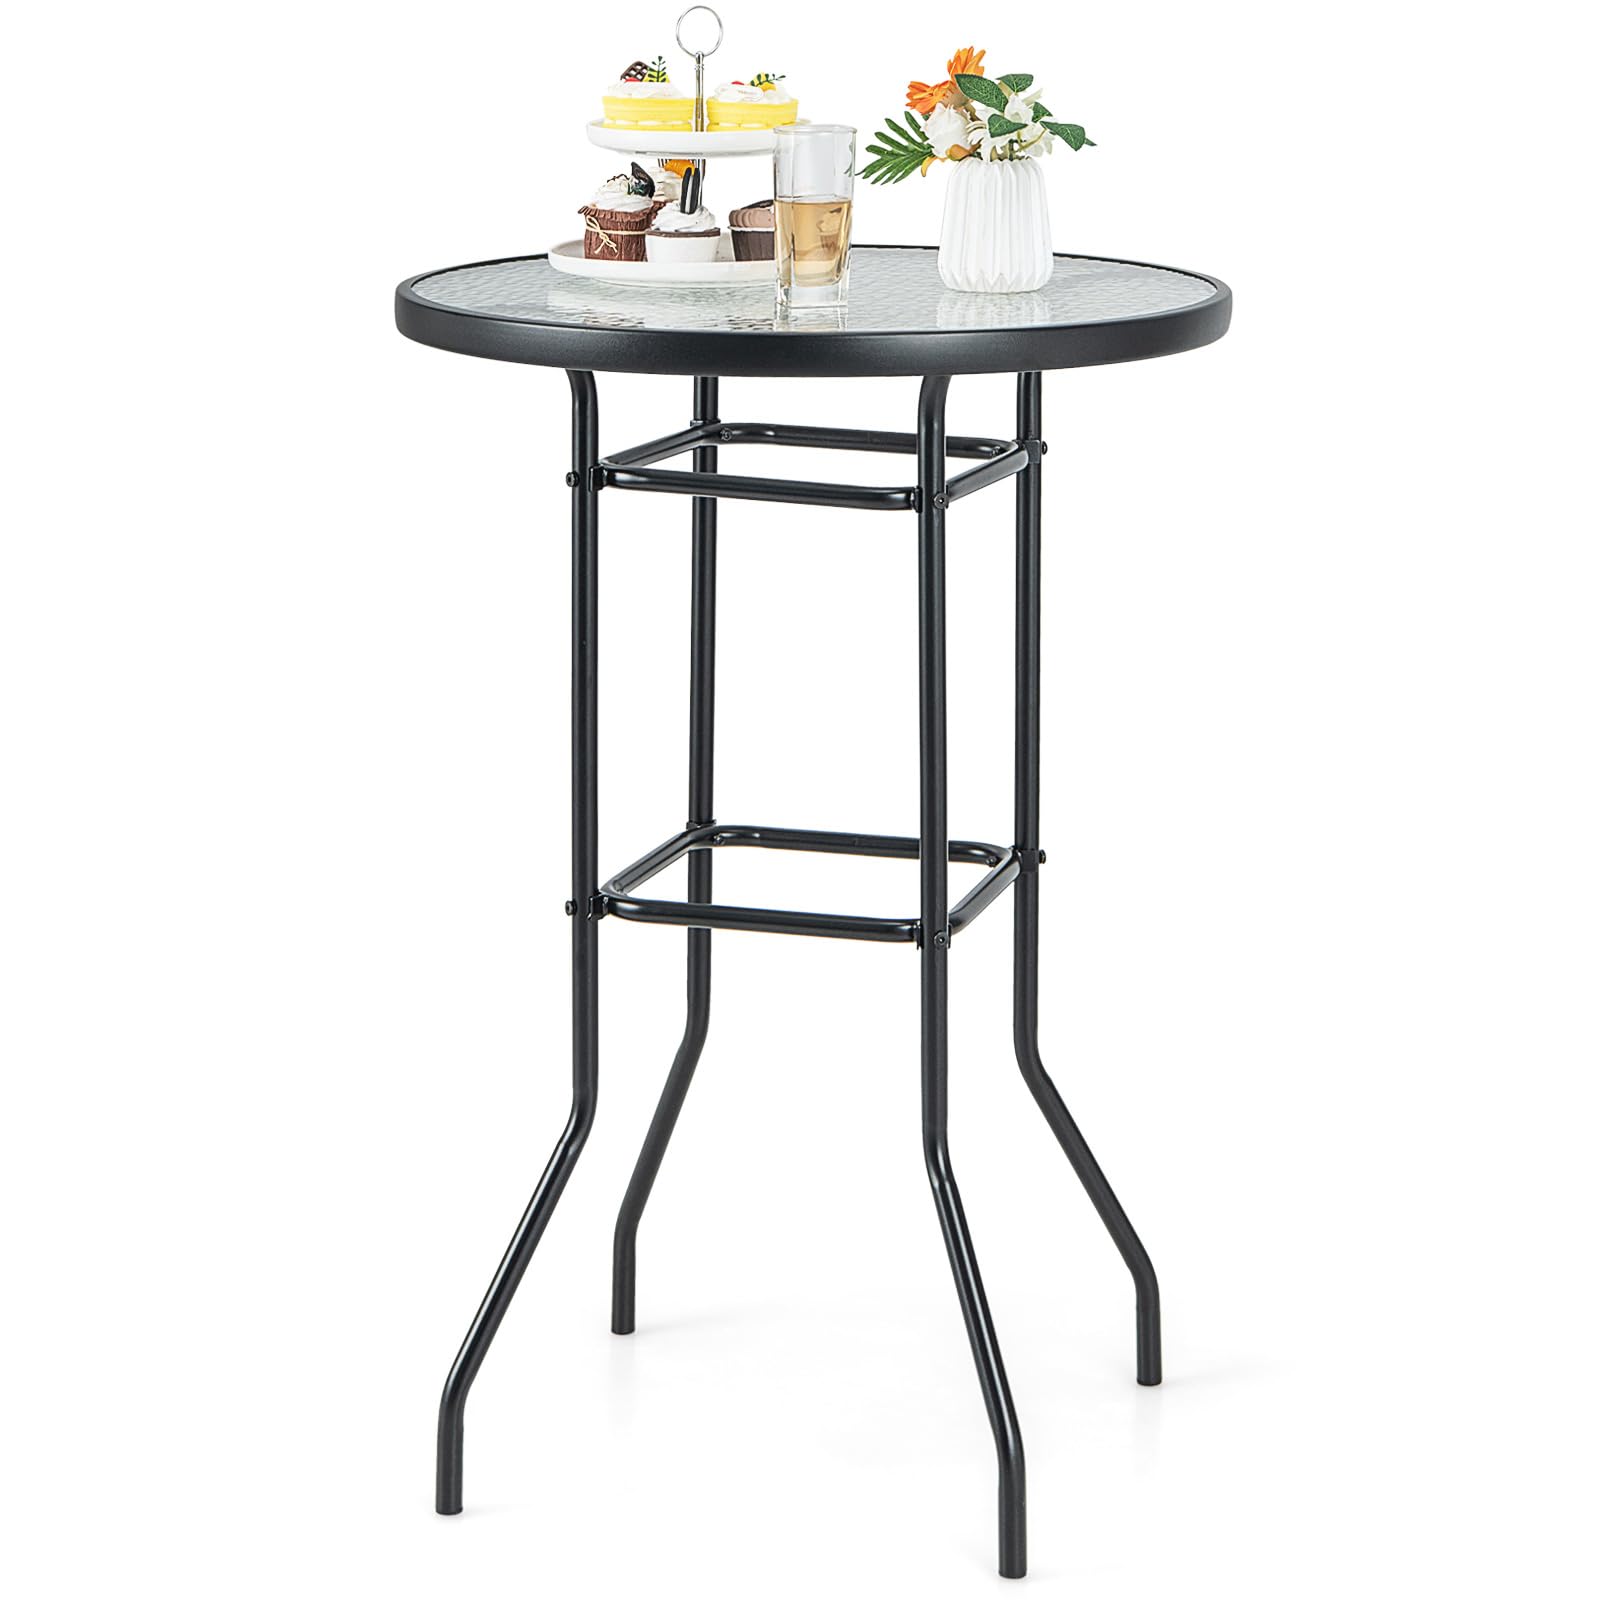 Giantex Patio Bar Table, 38" Height High Top Bistro Table, 27" Round Tempered Glass Tabletop